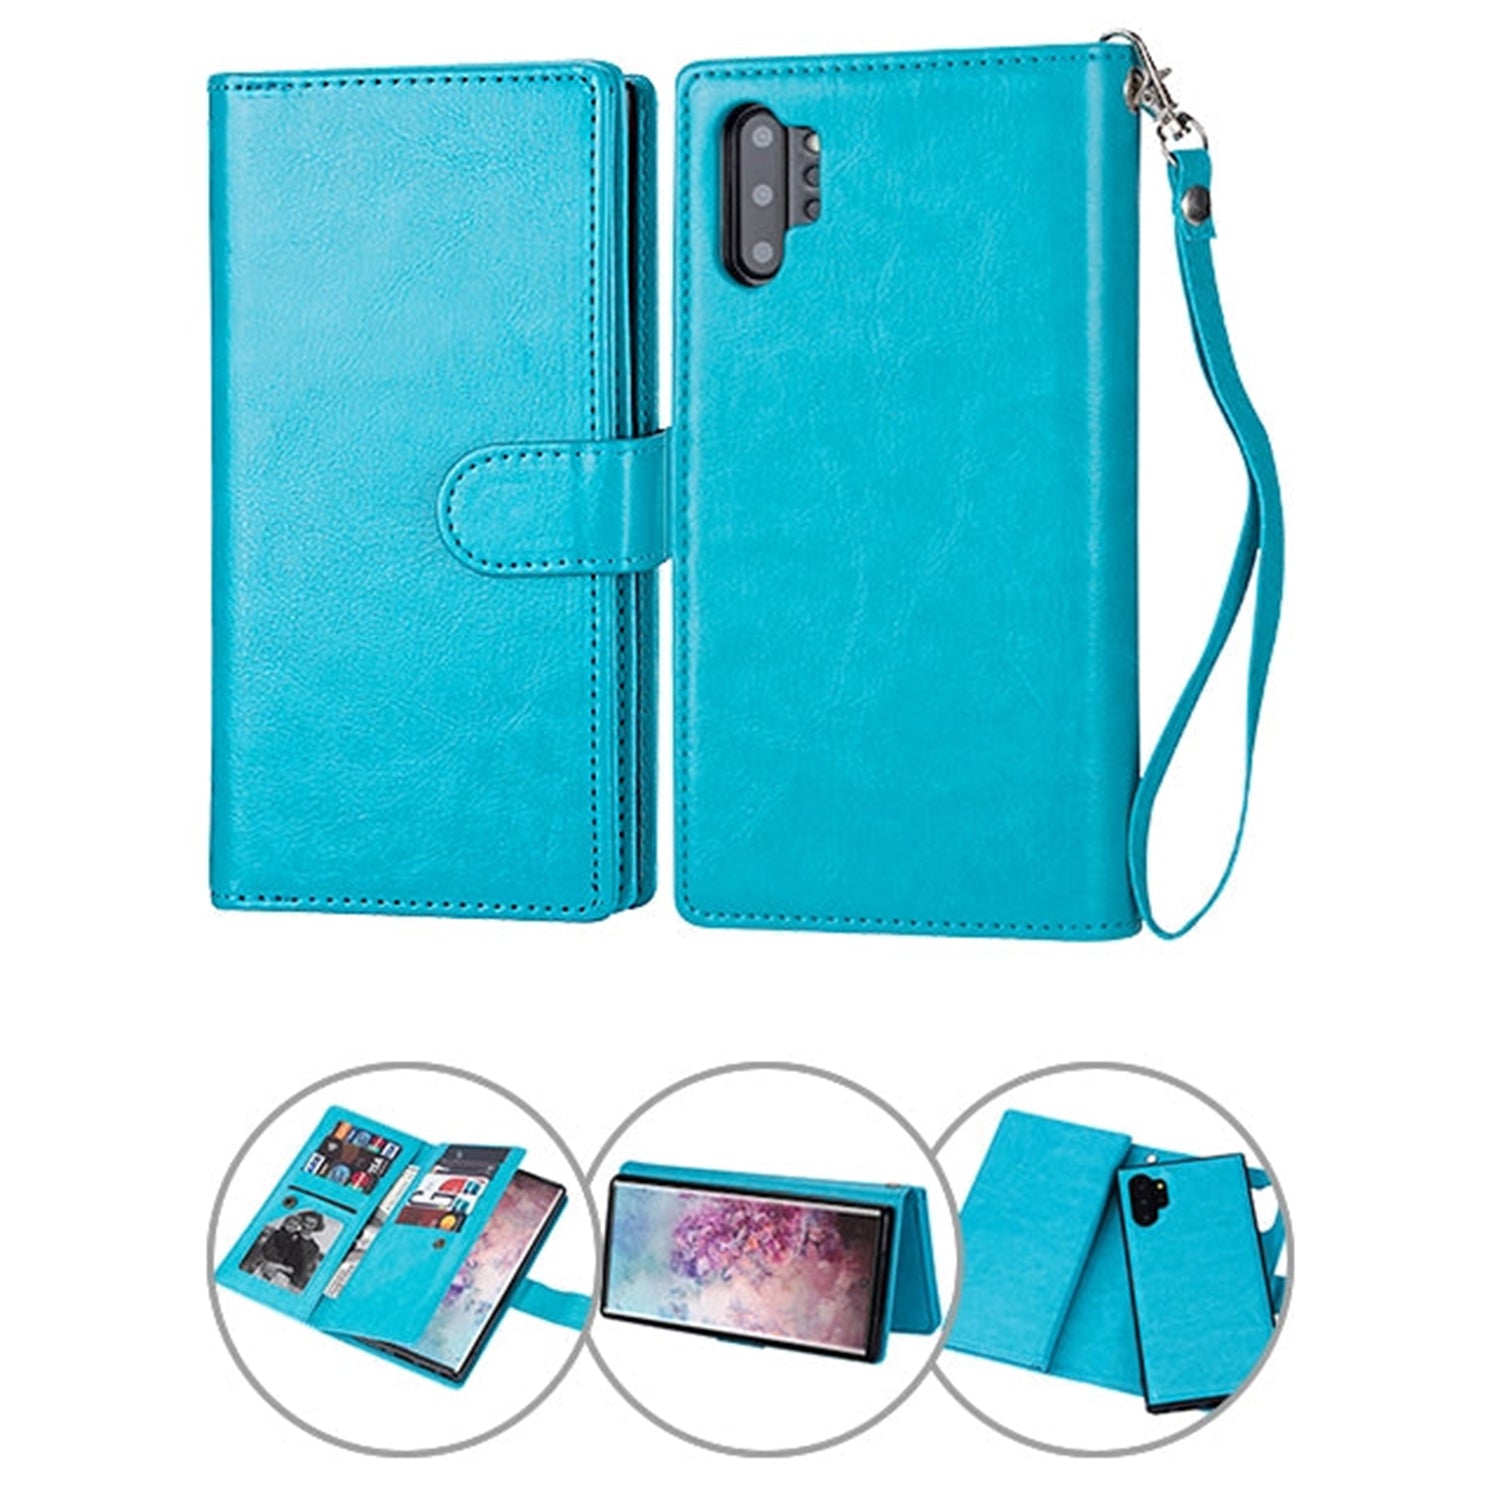 Samsung Galaxy Note 10 Plus 2 in 1 Leather Wallet Case With 9 Credit Card Slots and Removable Back Cover